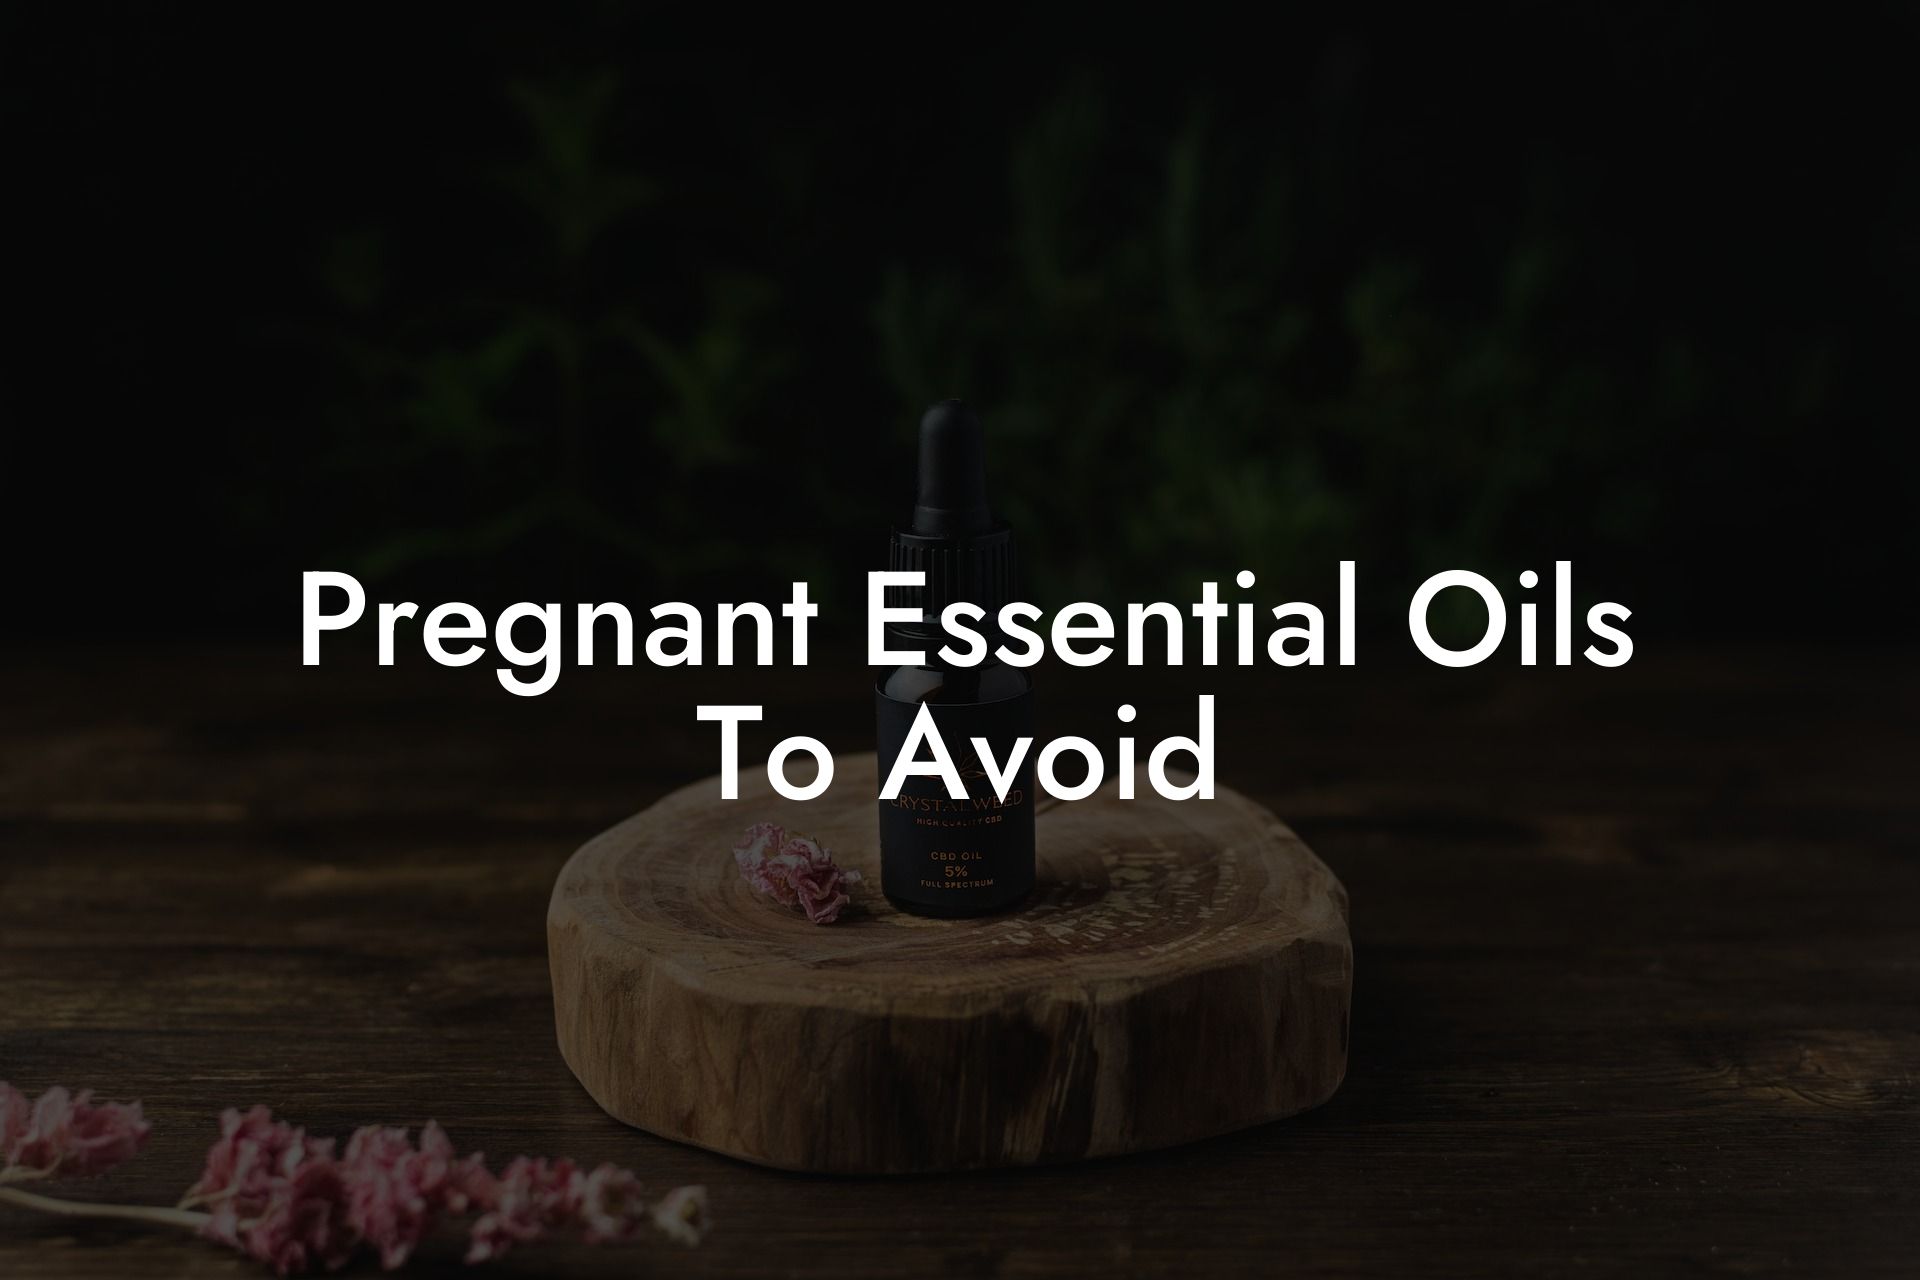 Pregnant Essential Oils To Avoid